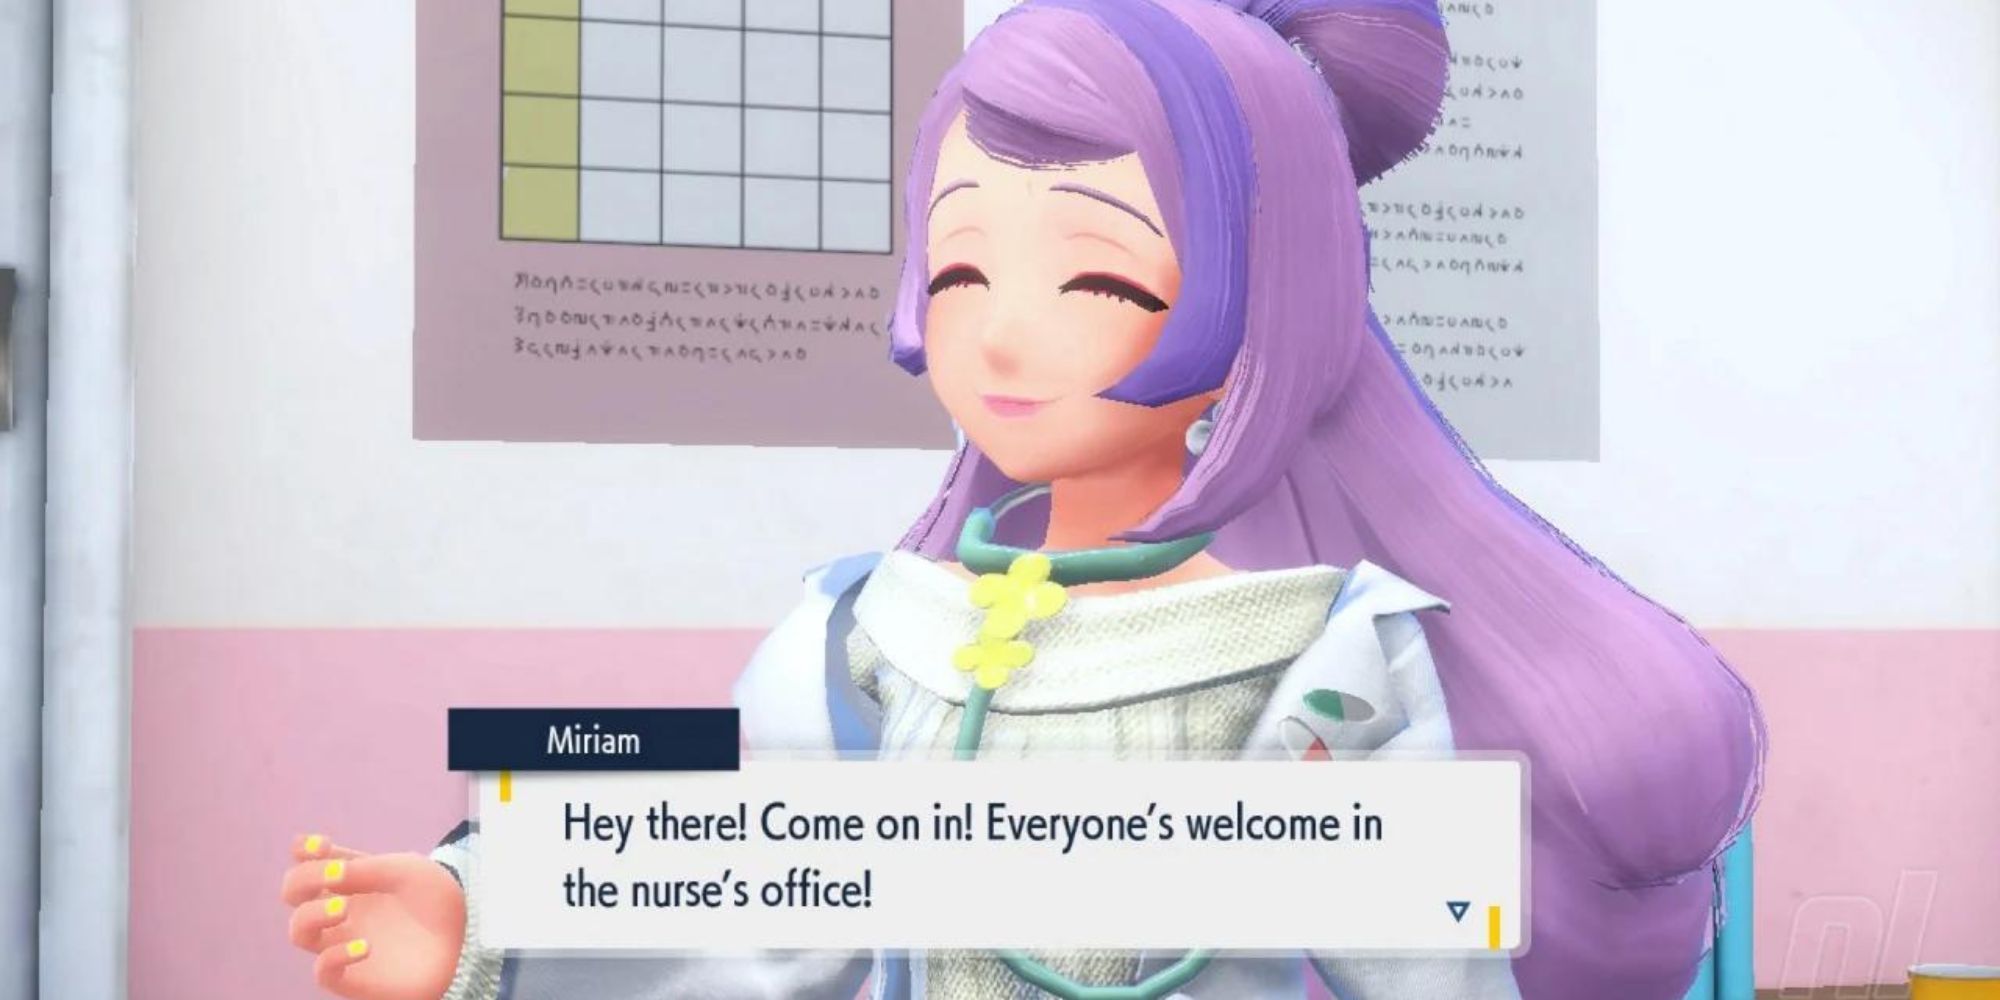 Miriam welcoming the player in Pokemon Scarlet and Violet